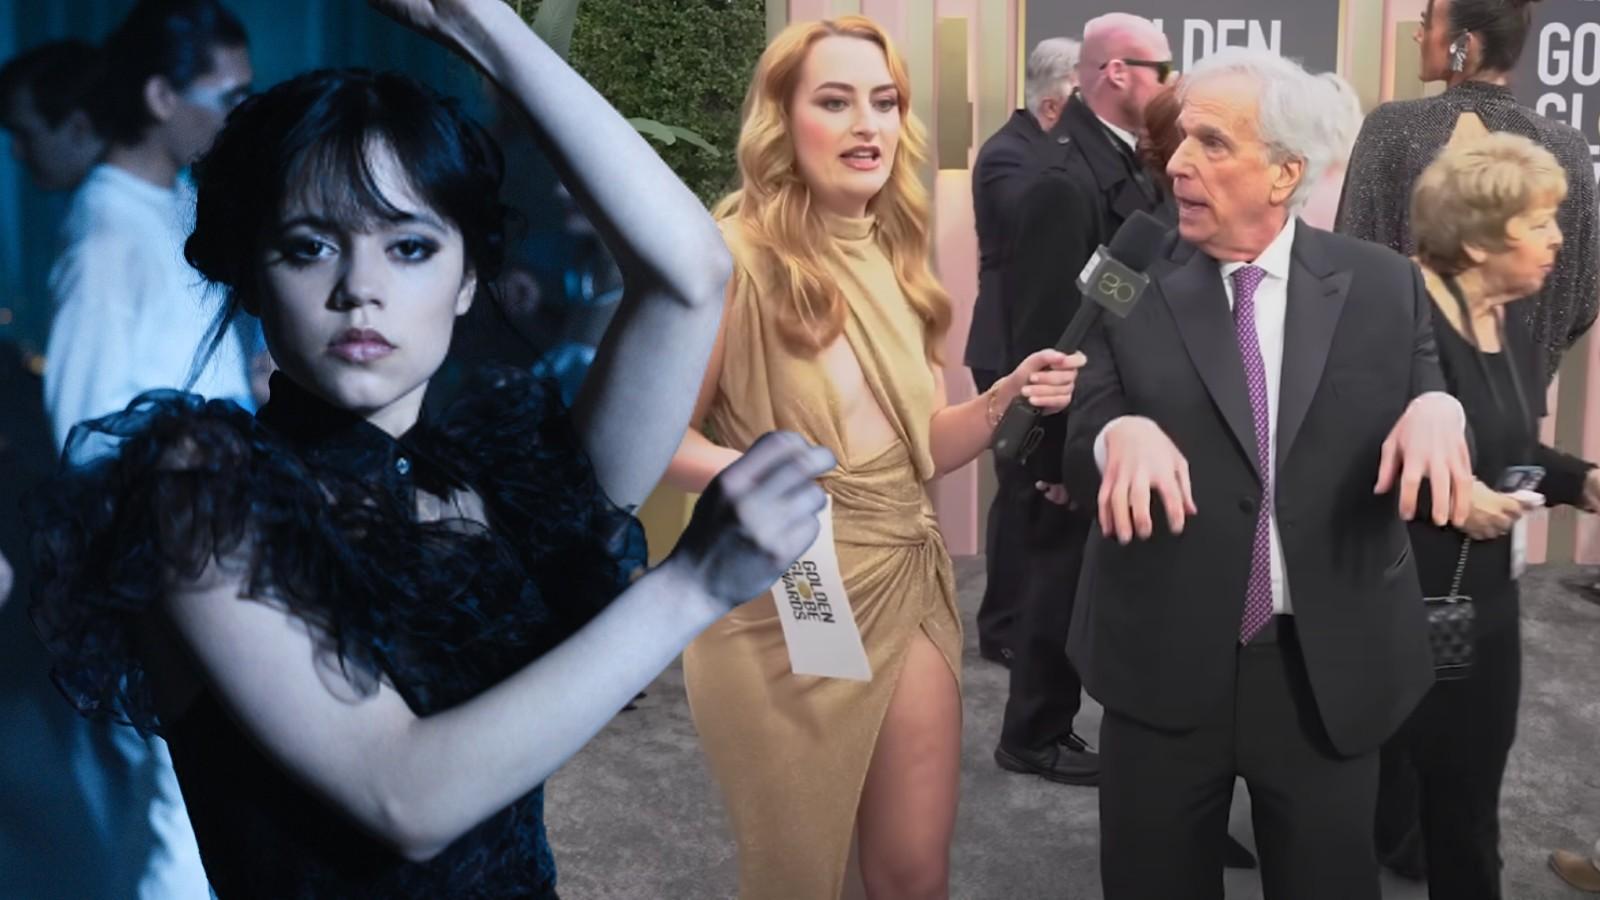 Jenna Ortega in Wednesday and Amelia Dimoldenberg and Henry Winkler doing the dance at the Golden Globes